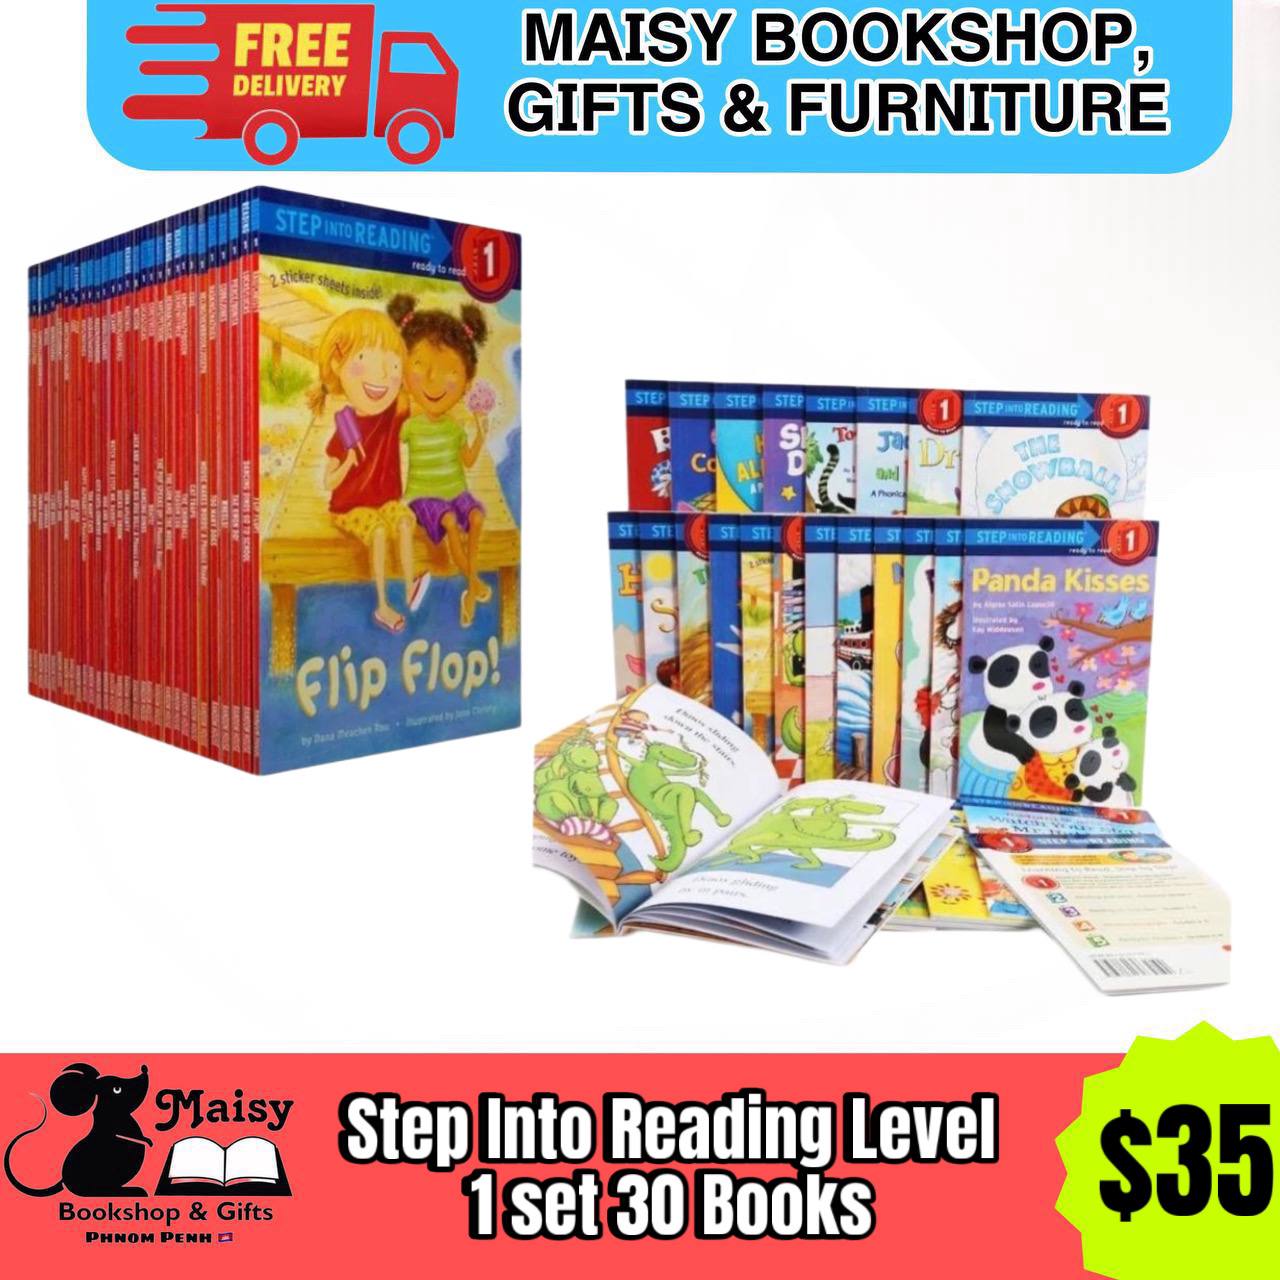 Step into reading - level 1 ( 30 books ) | Maisy Bookshop, Gifts 